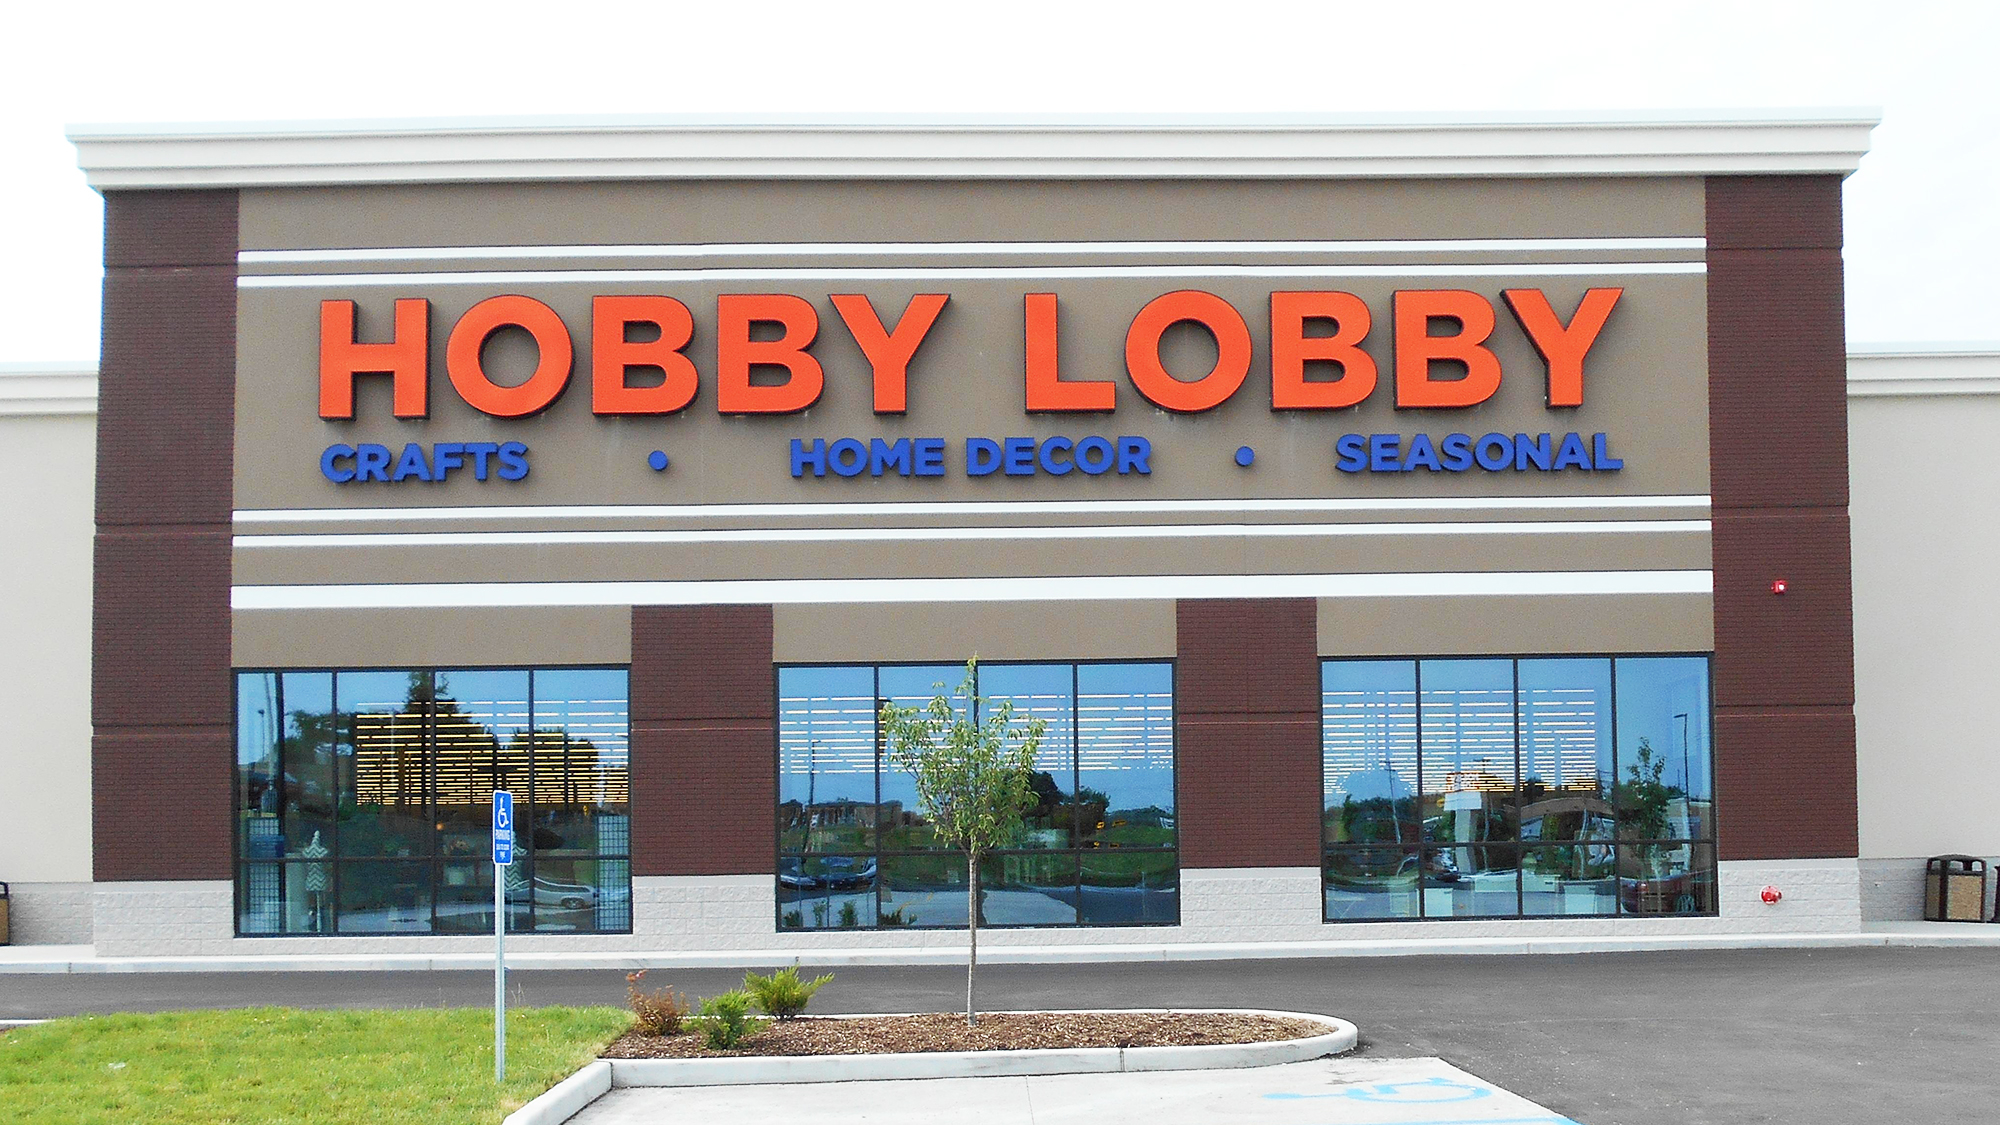 Hobby Lobby Coupons near me in St. Louis, MO 63128 | 8coupons